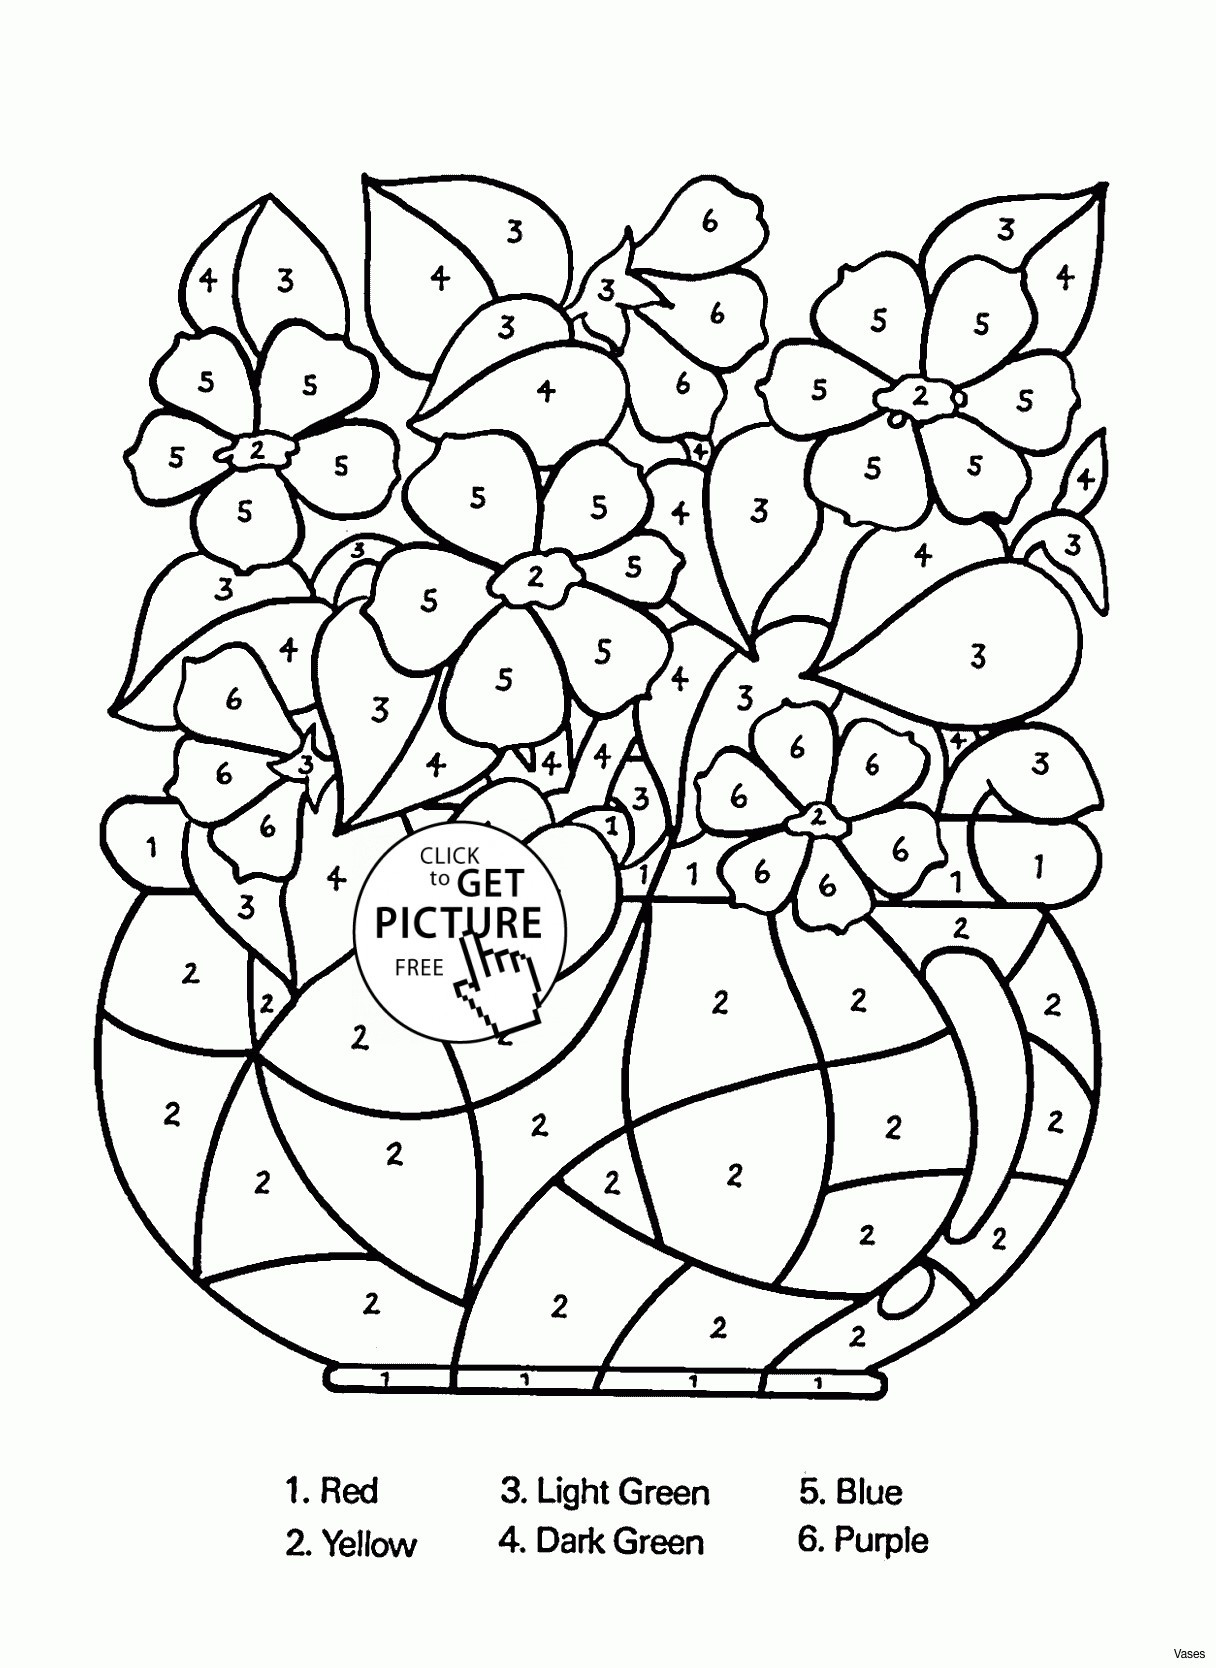 fake plants for vases of fake twitter template new vases flower vase coloring page pages of pertaining to fake twitter template new vases flower vase coloring page pages of flowers in a top i